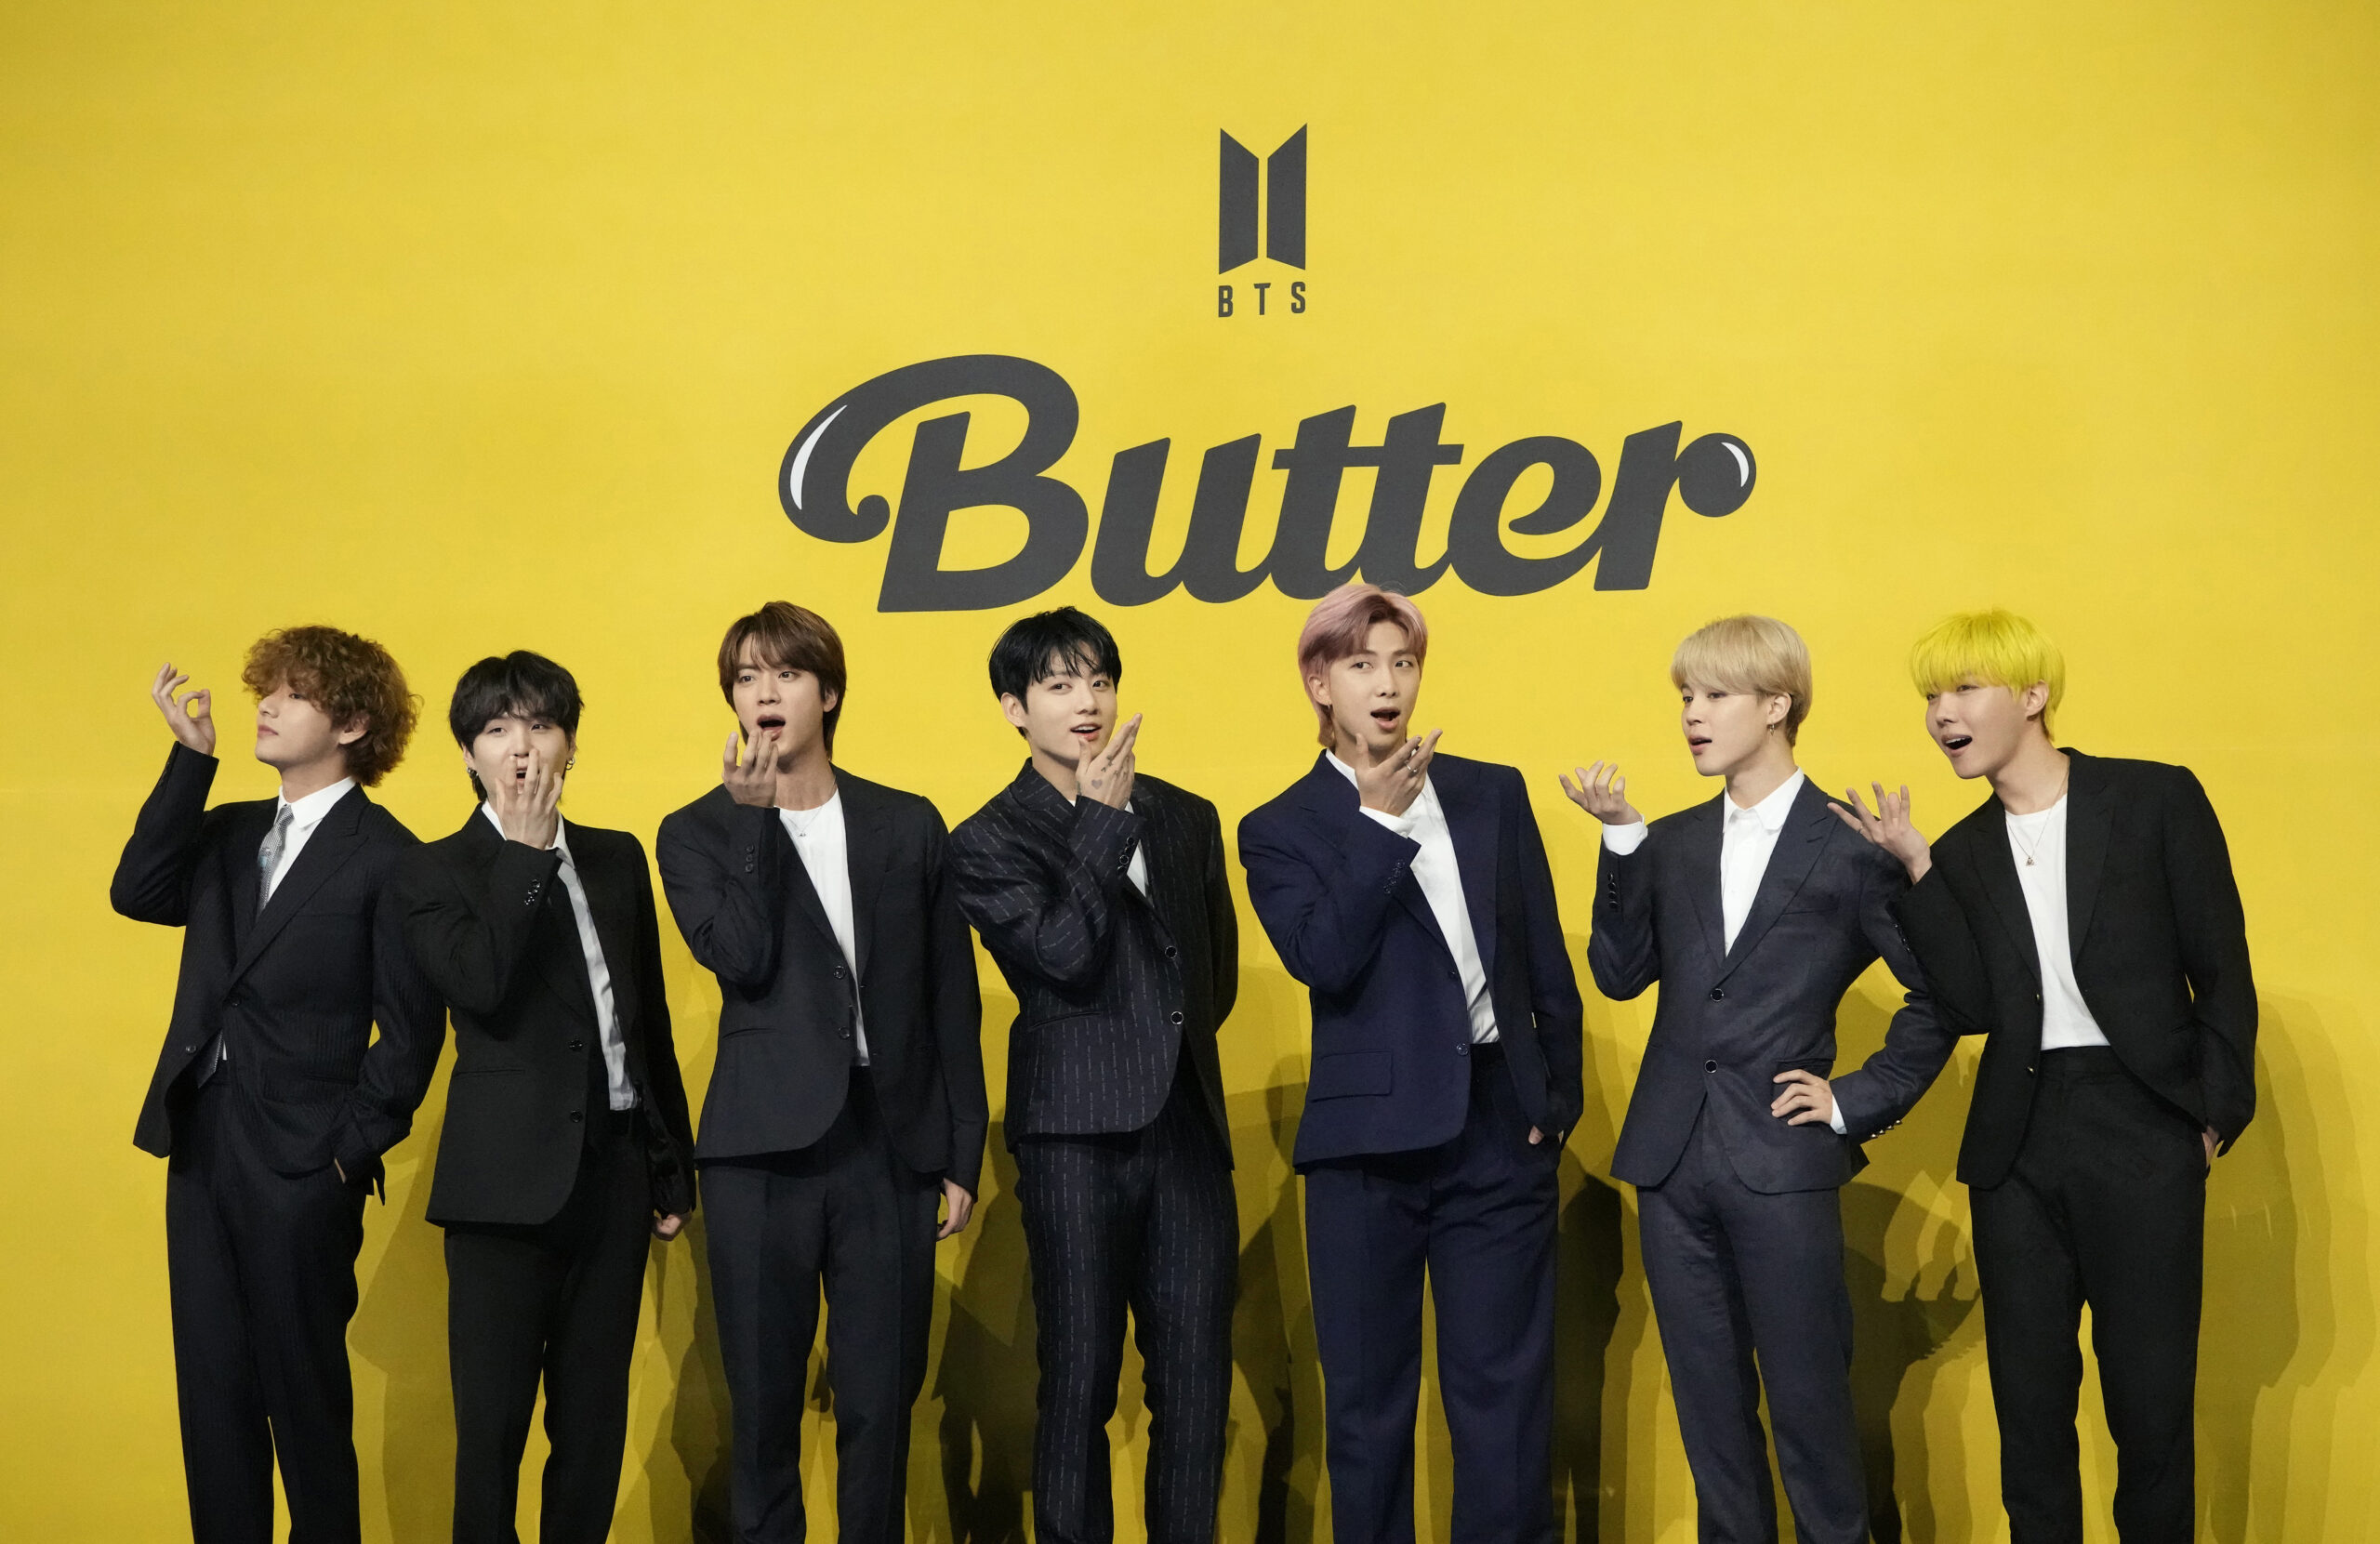 FILE- Members of South Korean K-pop band BTS, V, SUGA, JIN, Jung Kook, RM, Jimin, and j-hope from left to right, pose for photographers ahead of a press conference to introduce their new single "Butter" in Seoul, South Korea, Friday, May 21, 2021. South Korea may conduct a public survey to help determine whether to grant exemptions of the mandatory military service to members of the K-pop superstar boyband BTS, officials said Wednesday, Aug. 31, 2022.(AP Photo/Lee Jin-man, File)